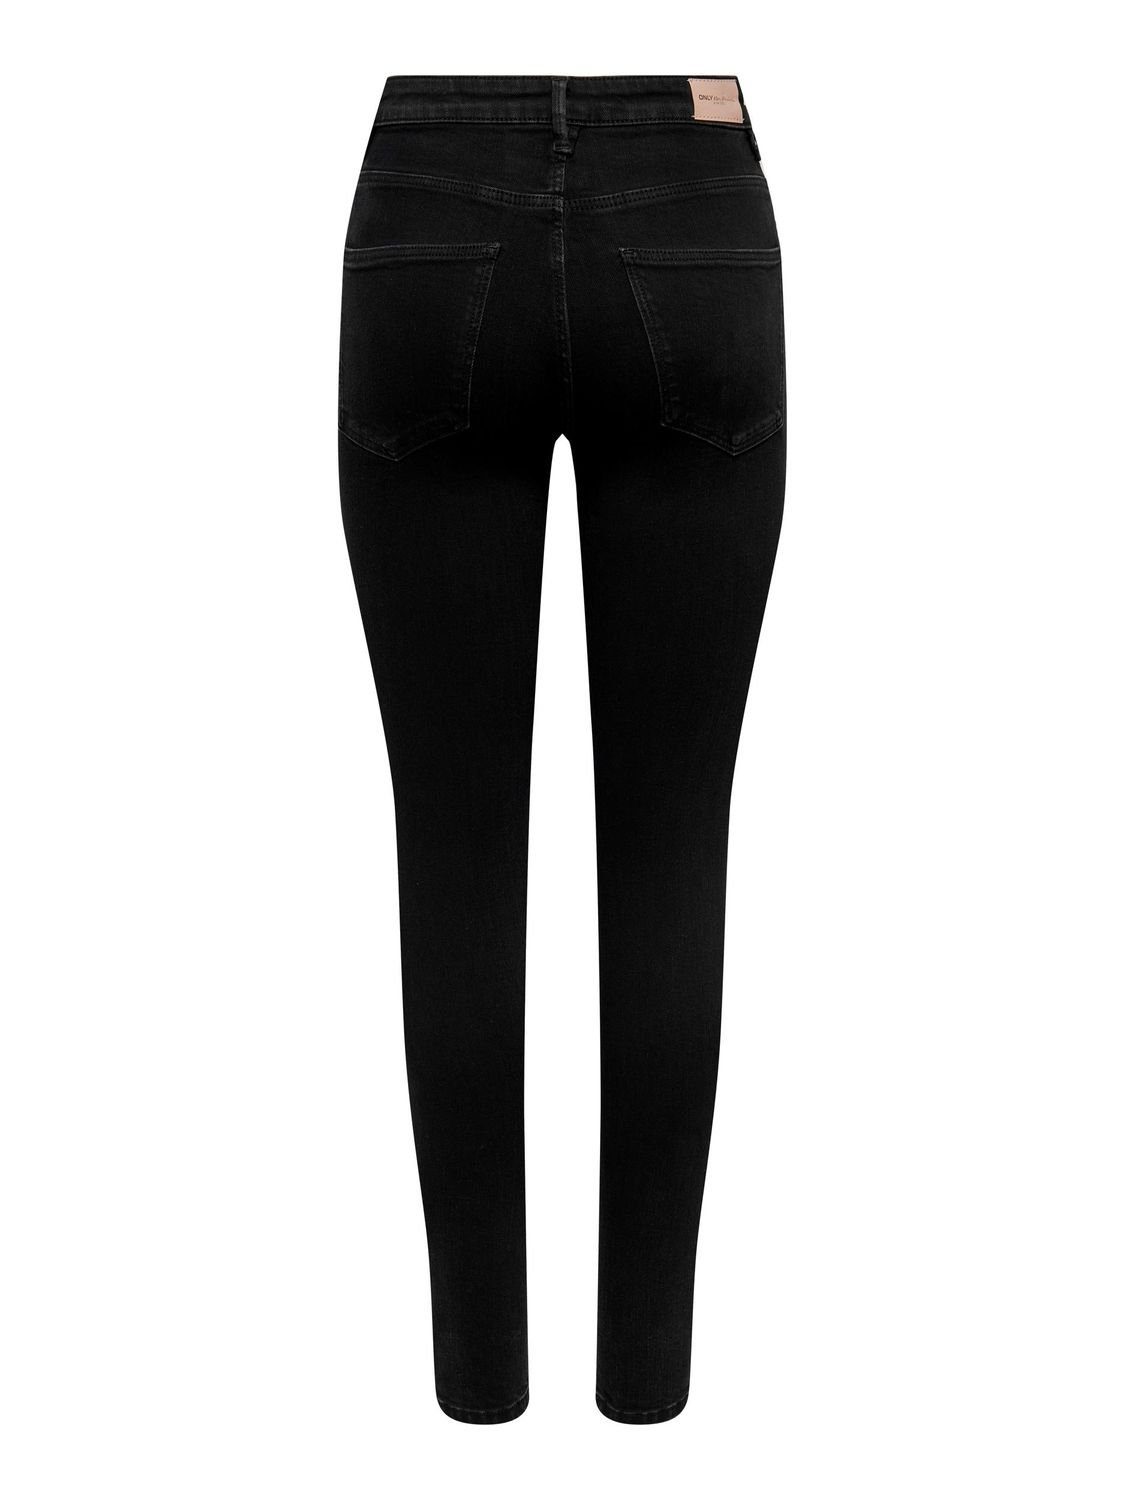 Damen Jeans Only Skinny-fit-Jeans ONLICONIC mit Stretch